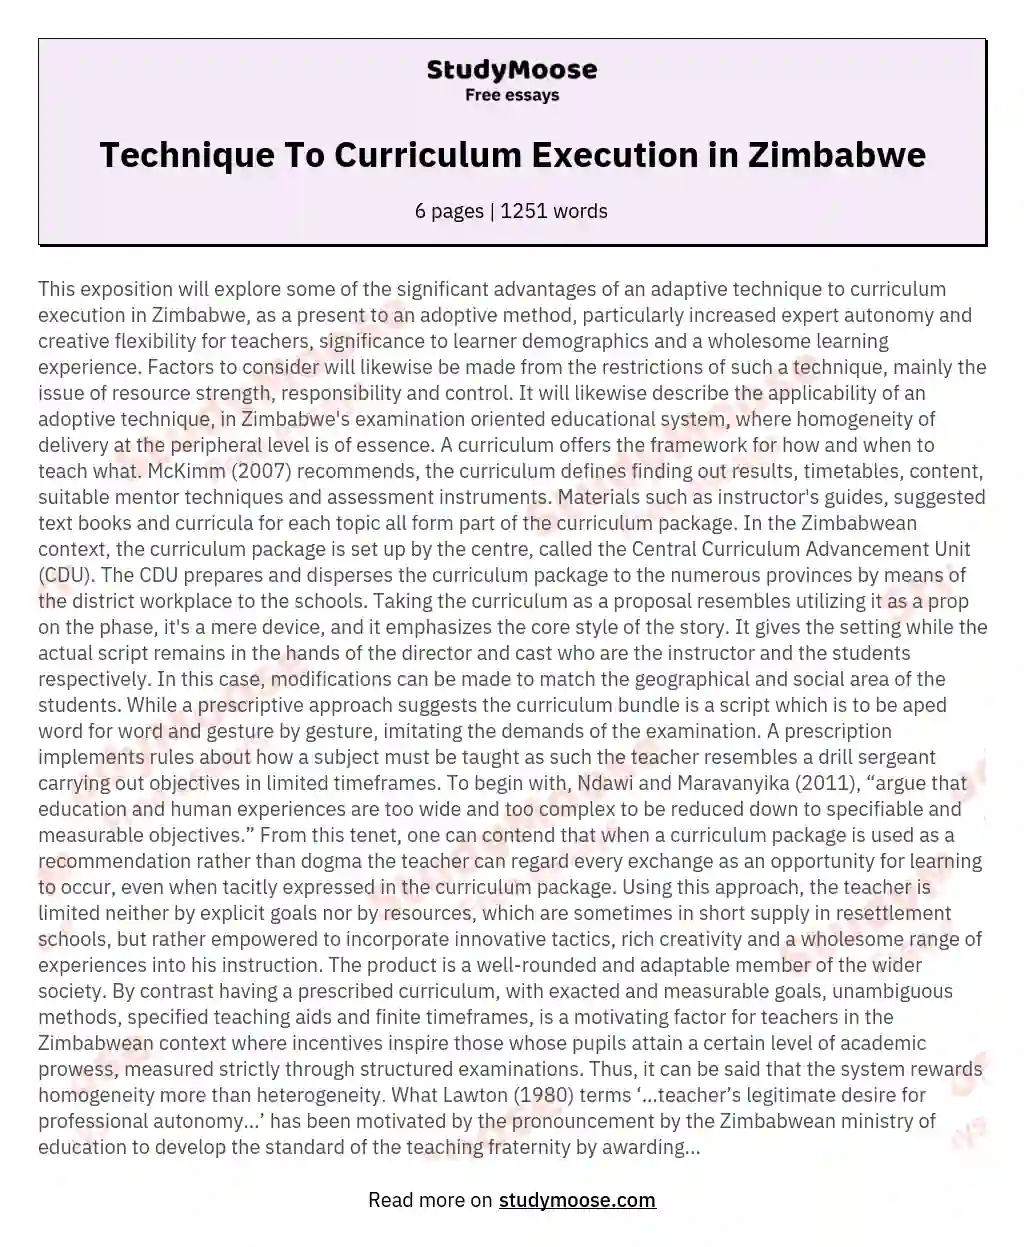 Technique To Curriculum Execution in Zimbabwe